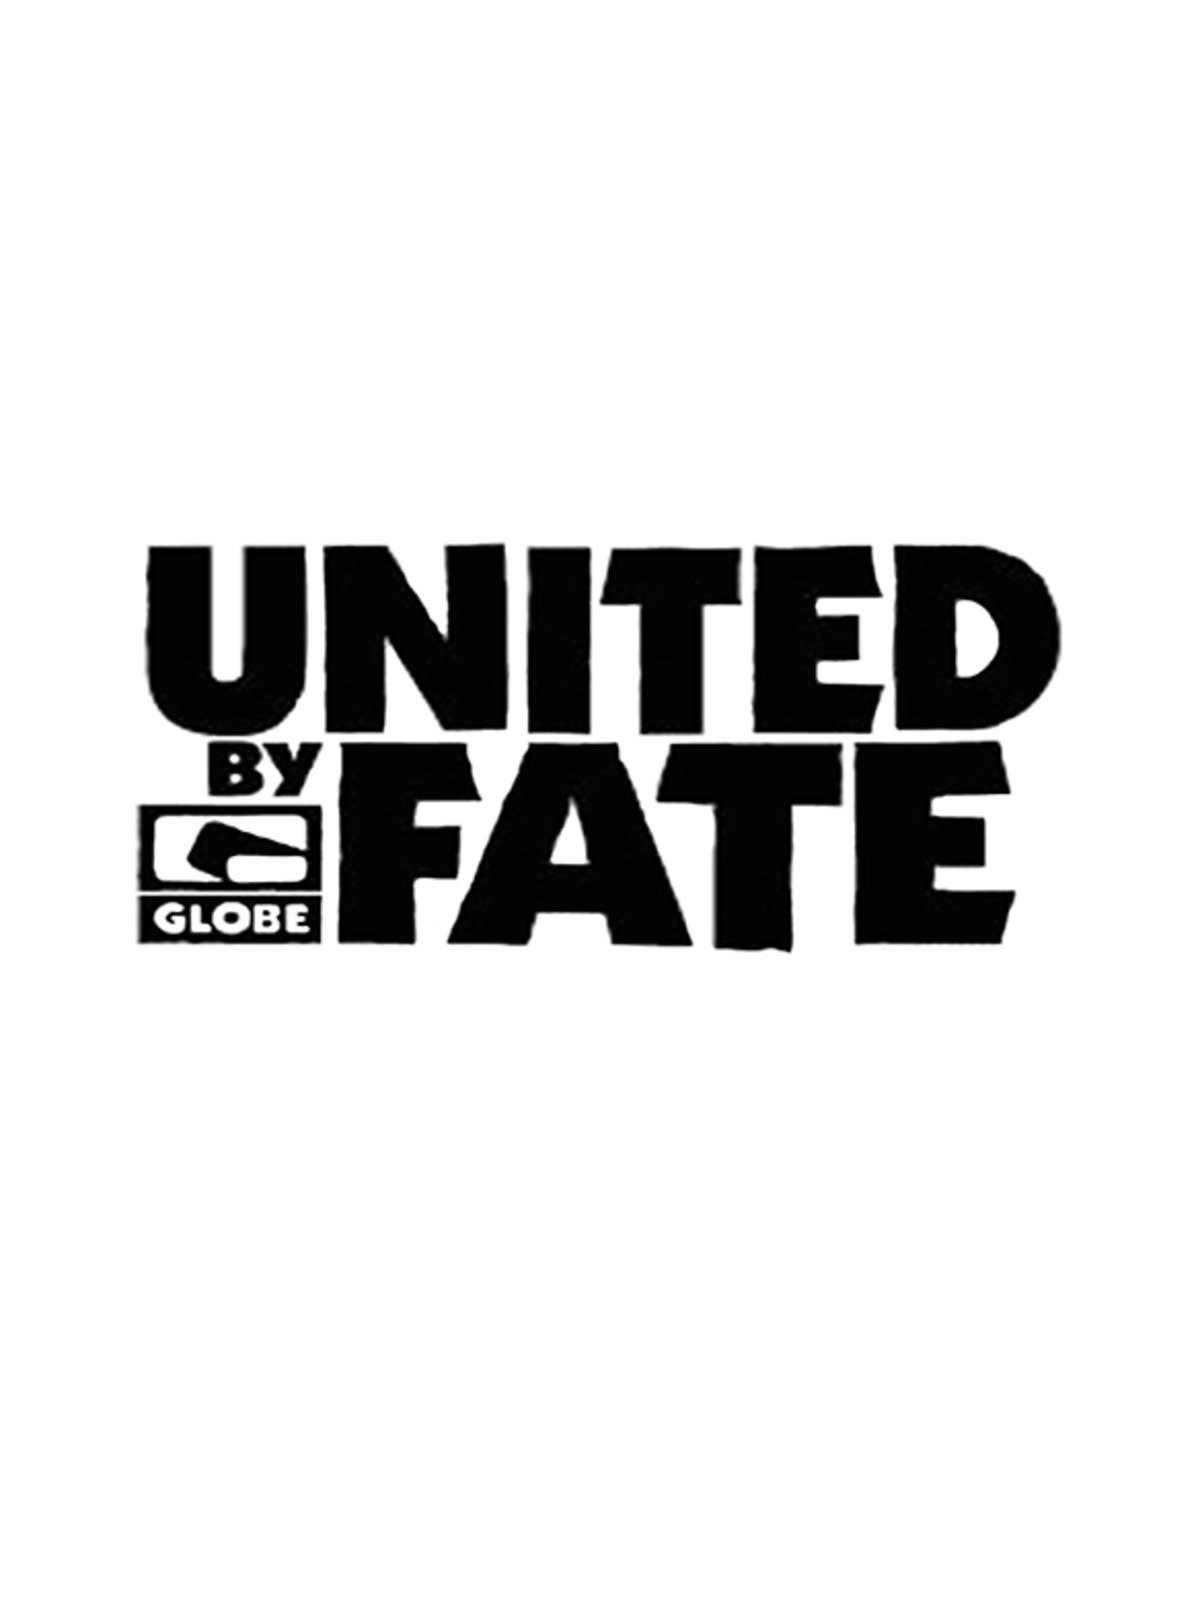 United By Fate by Globe Shoes video cover